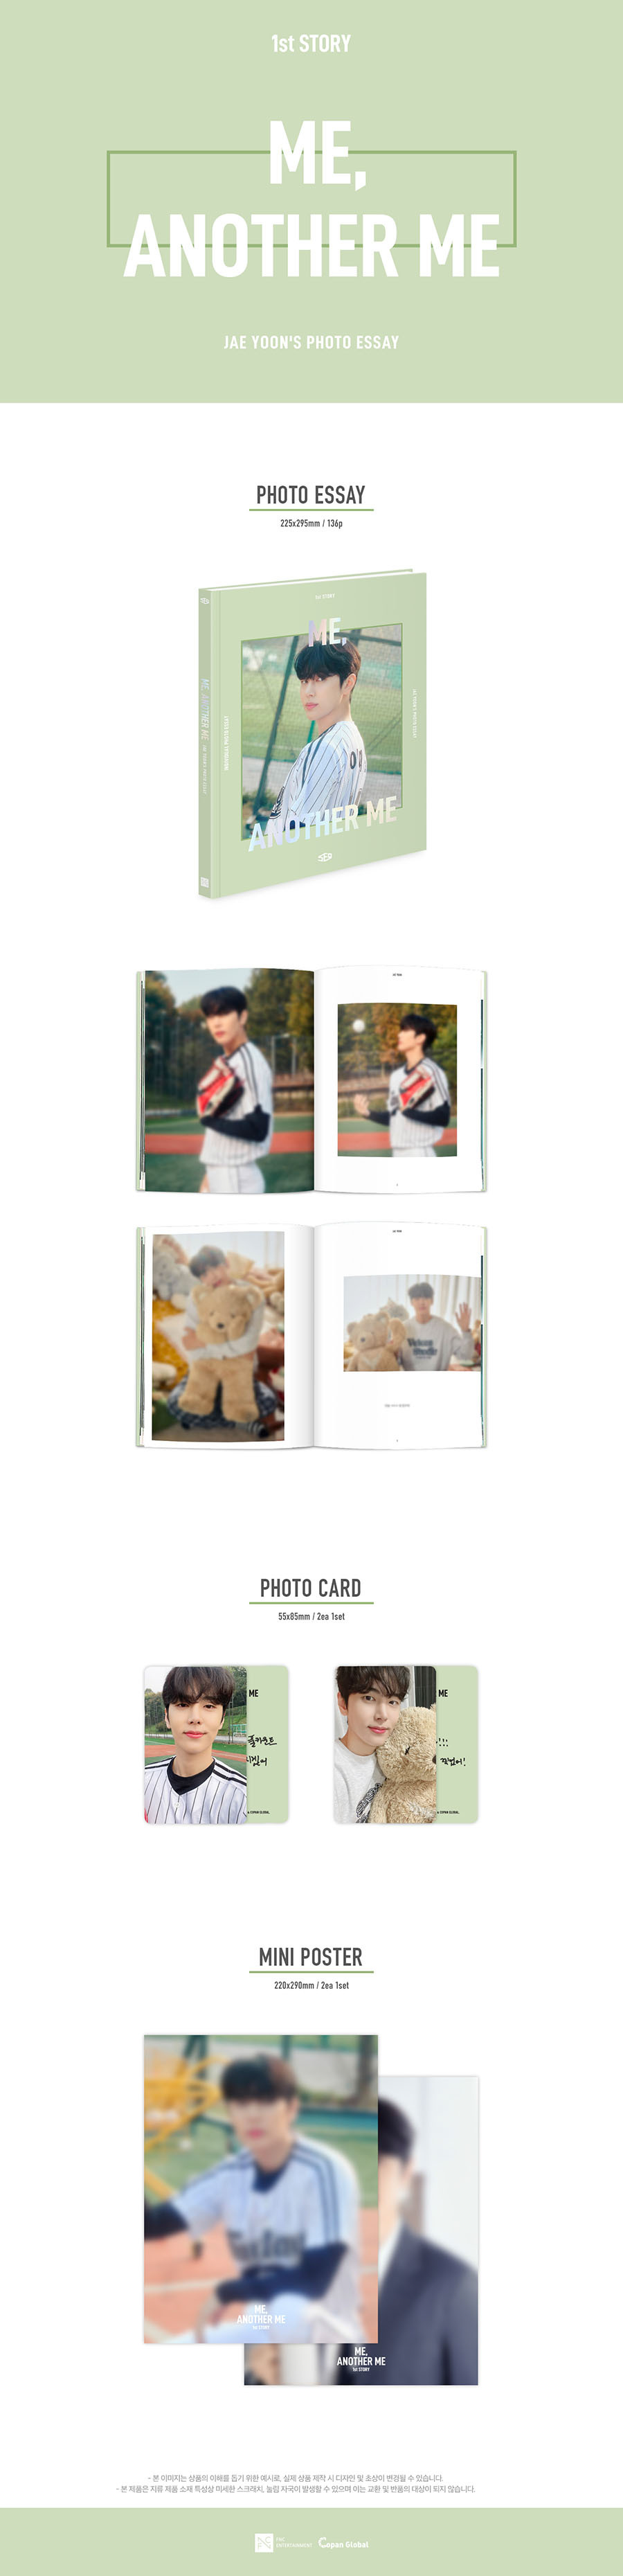 SF9 JAEYOON PHOTO ESSAY SET [ME, ANOTHER ME] SF9 JAEYOON DAWON ZUHO photobook Photo Essay Me AnotherMe FNC